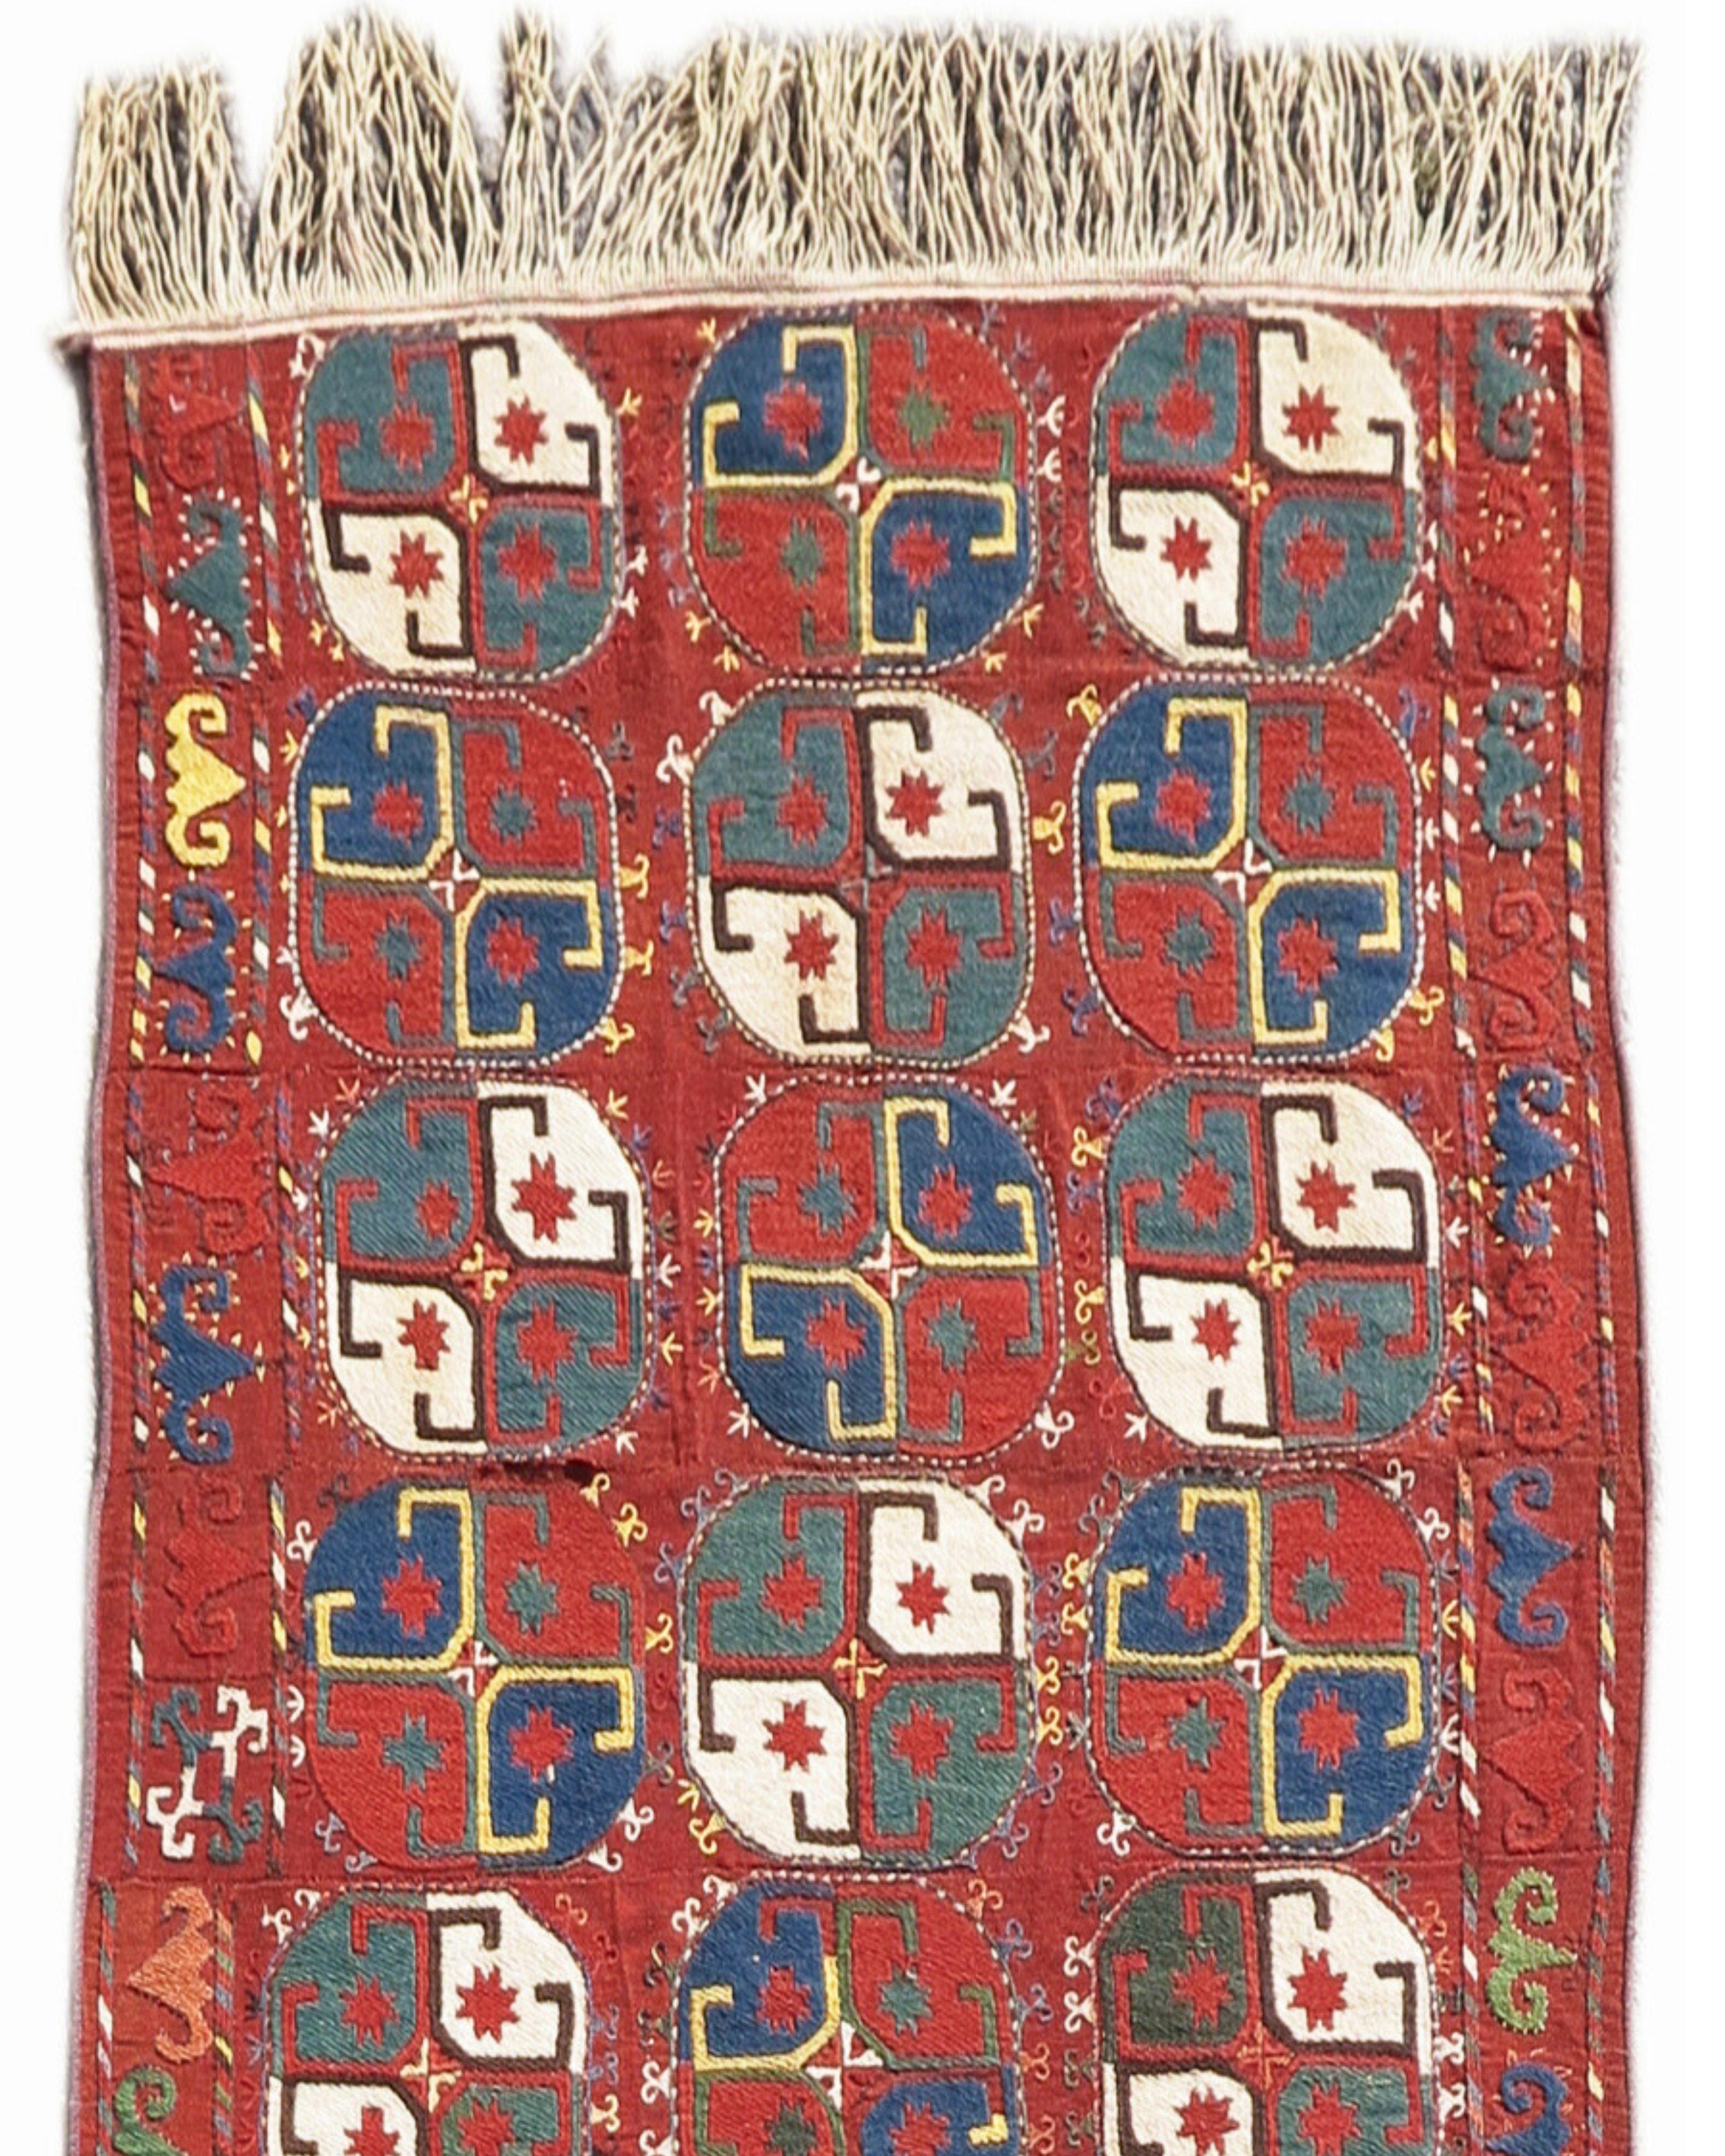 Central Asian Antique Uzbek Mixed Technique Flatwoven Rug, Early 20th Century For Sale